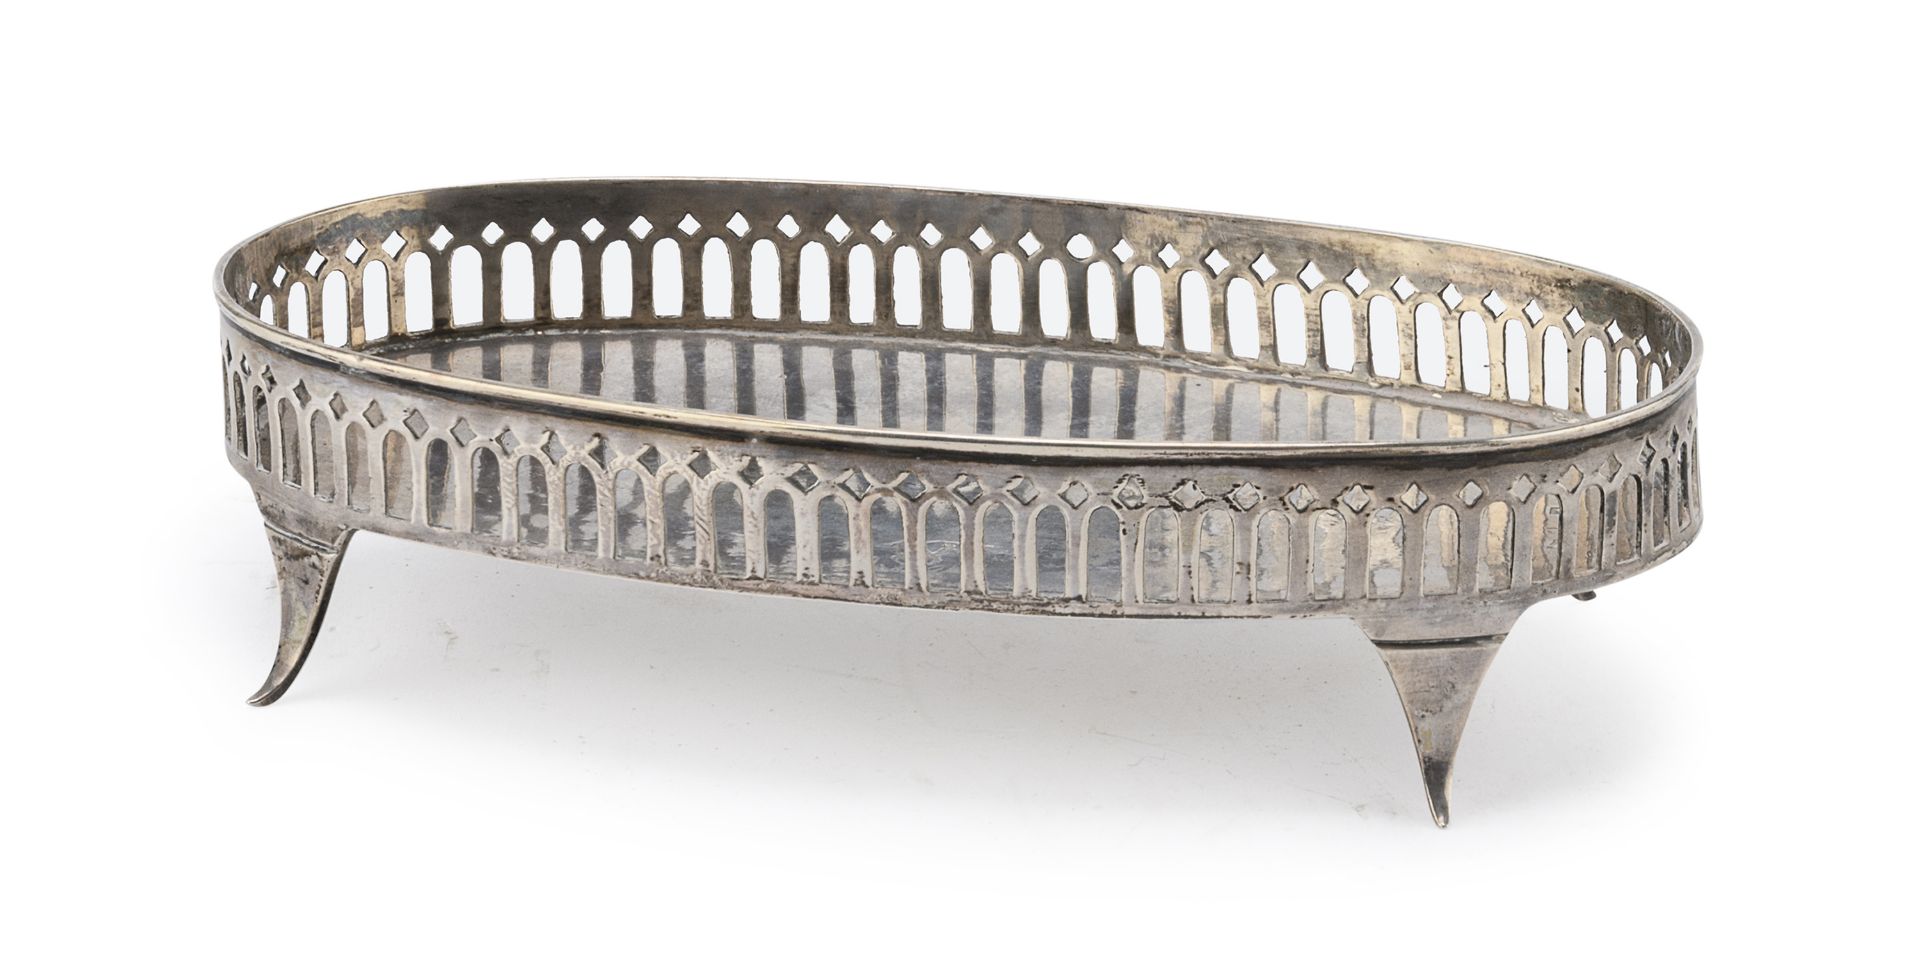 SILVER TRAY NAPLES EARLY 19TH CENTURY